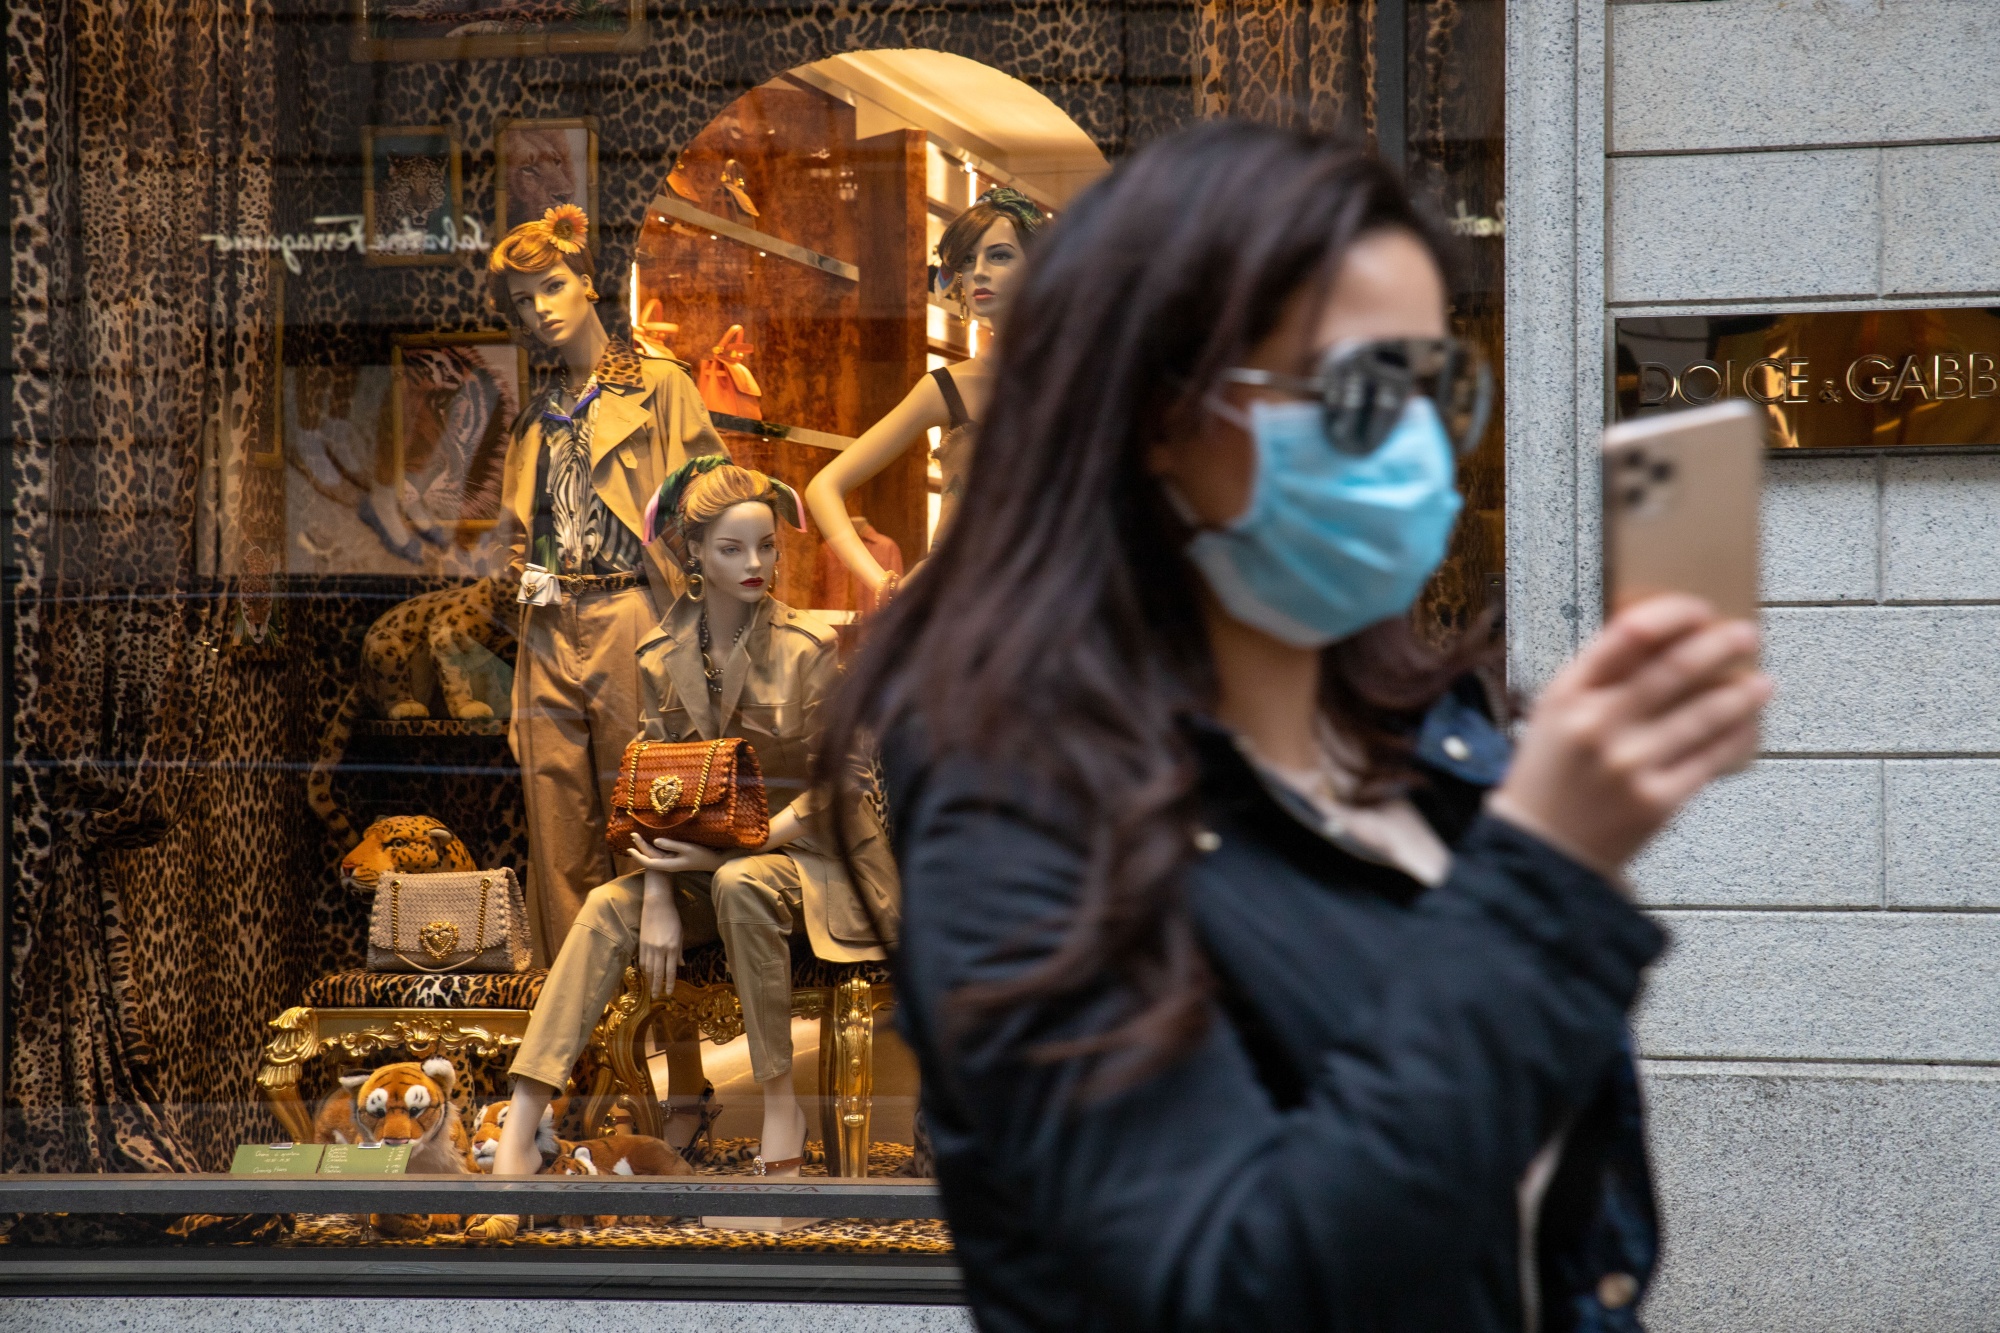 A pedestrian wearing a protective face mask takes a selfie outside a store in Milan on Feb. 25.